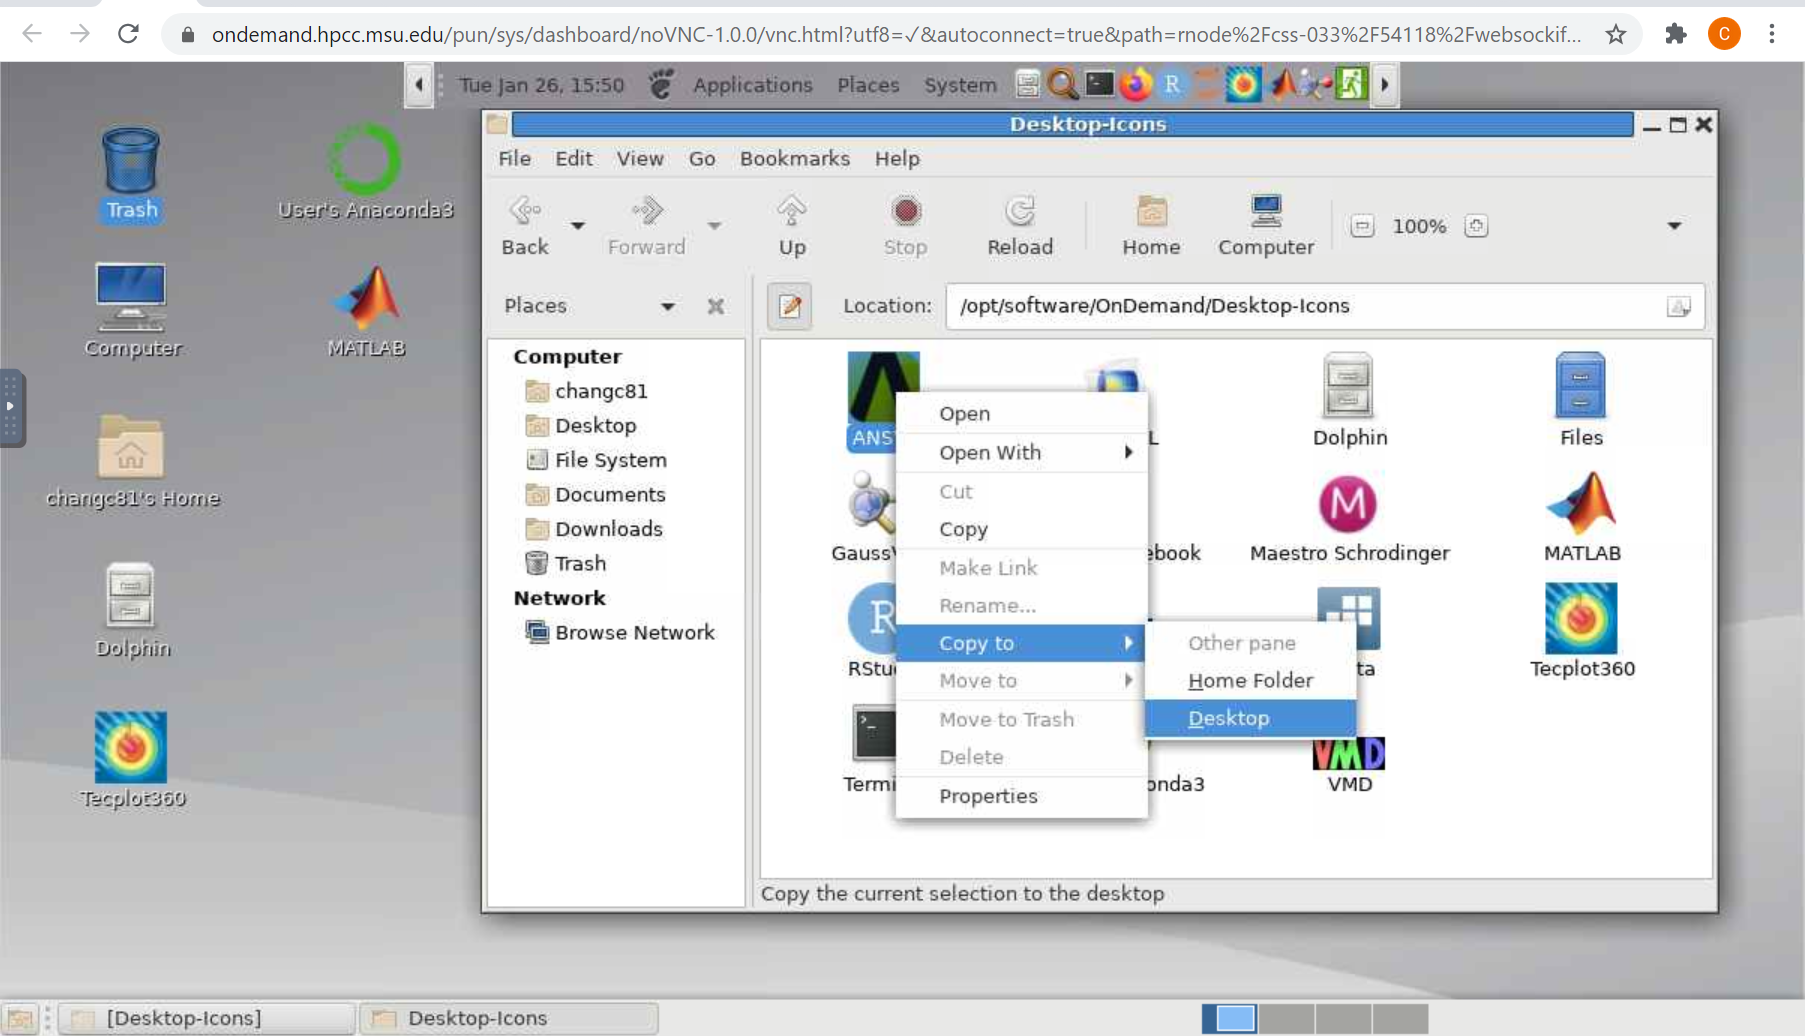 Screenshot of the interactive desktop window showing the right click menu of an application icon, with Copy to Desktop highlighted.